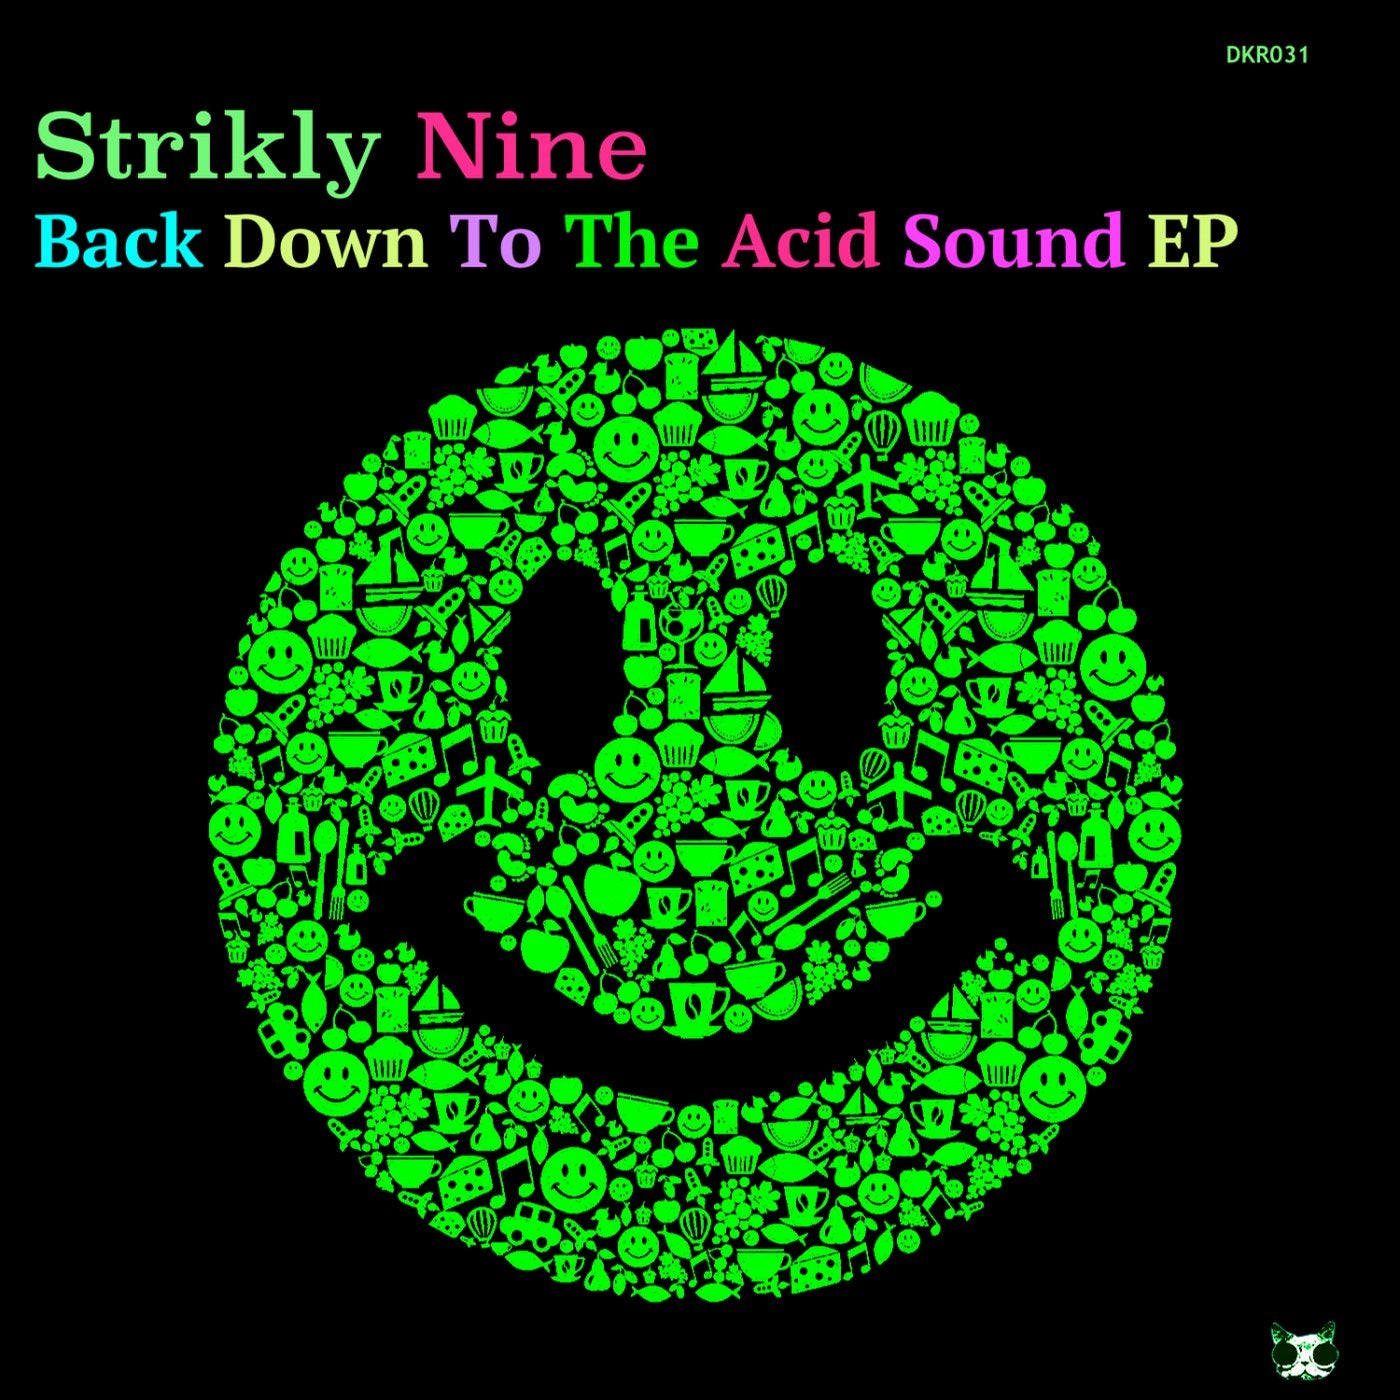 Back Down To The Acid Sound EP